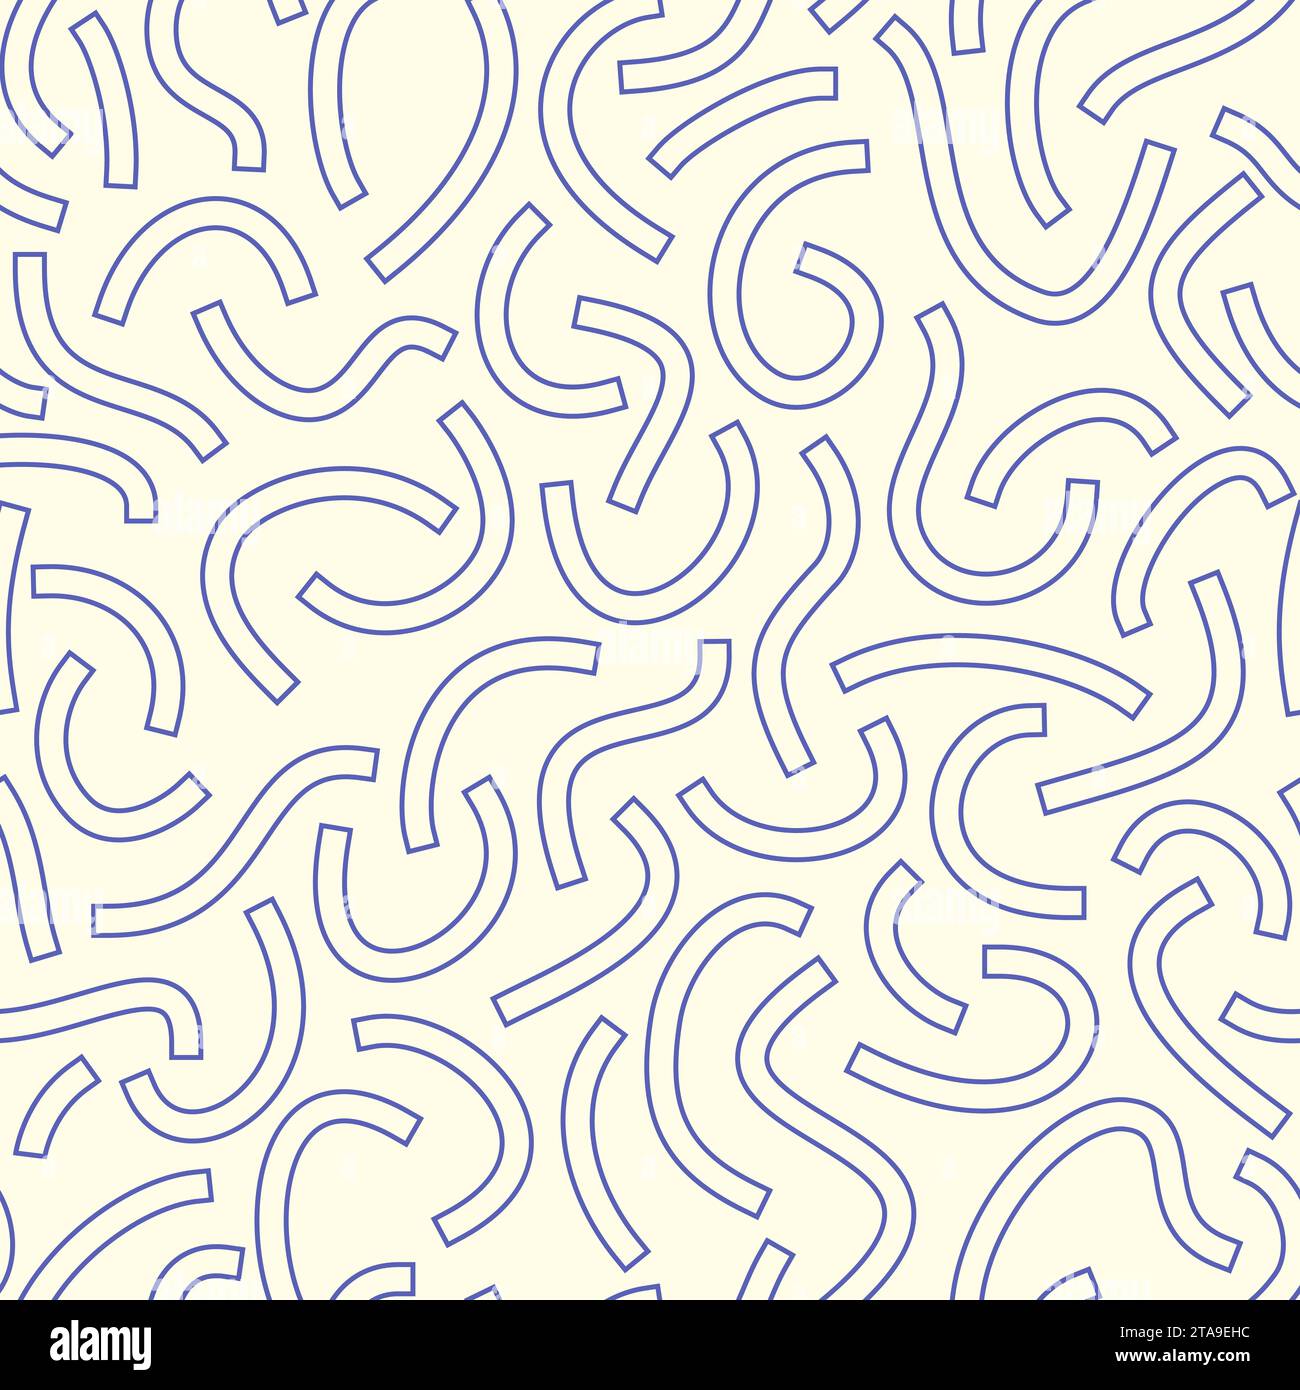 Tangled curvy lines seamless pattern repeat Vector Image